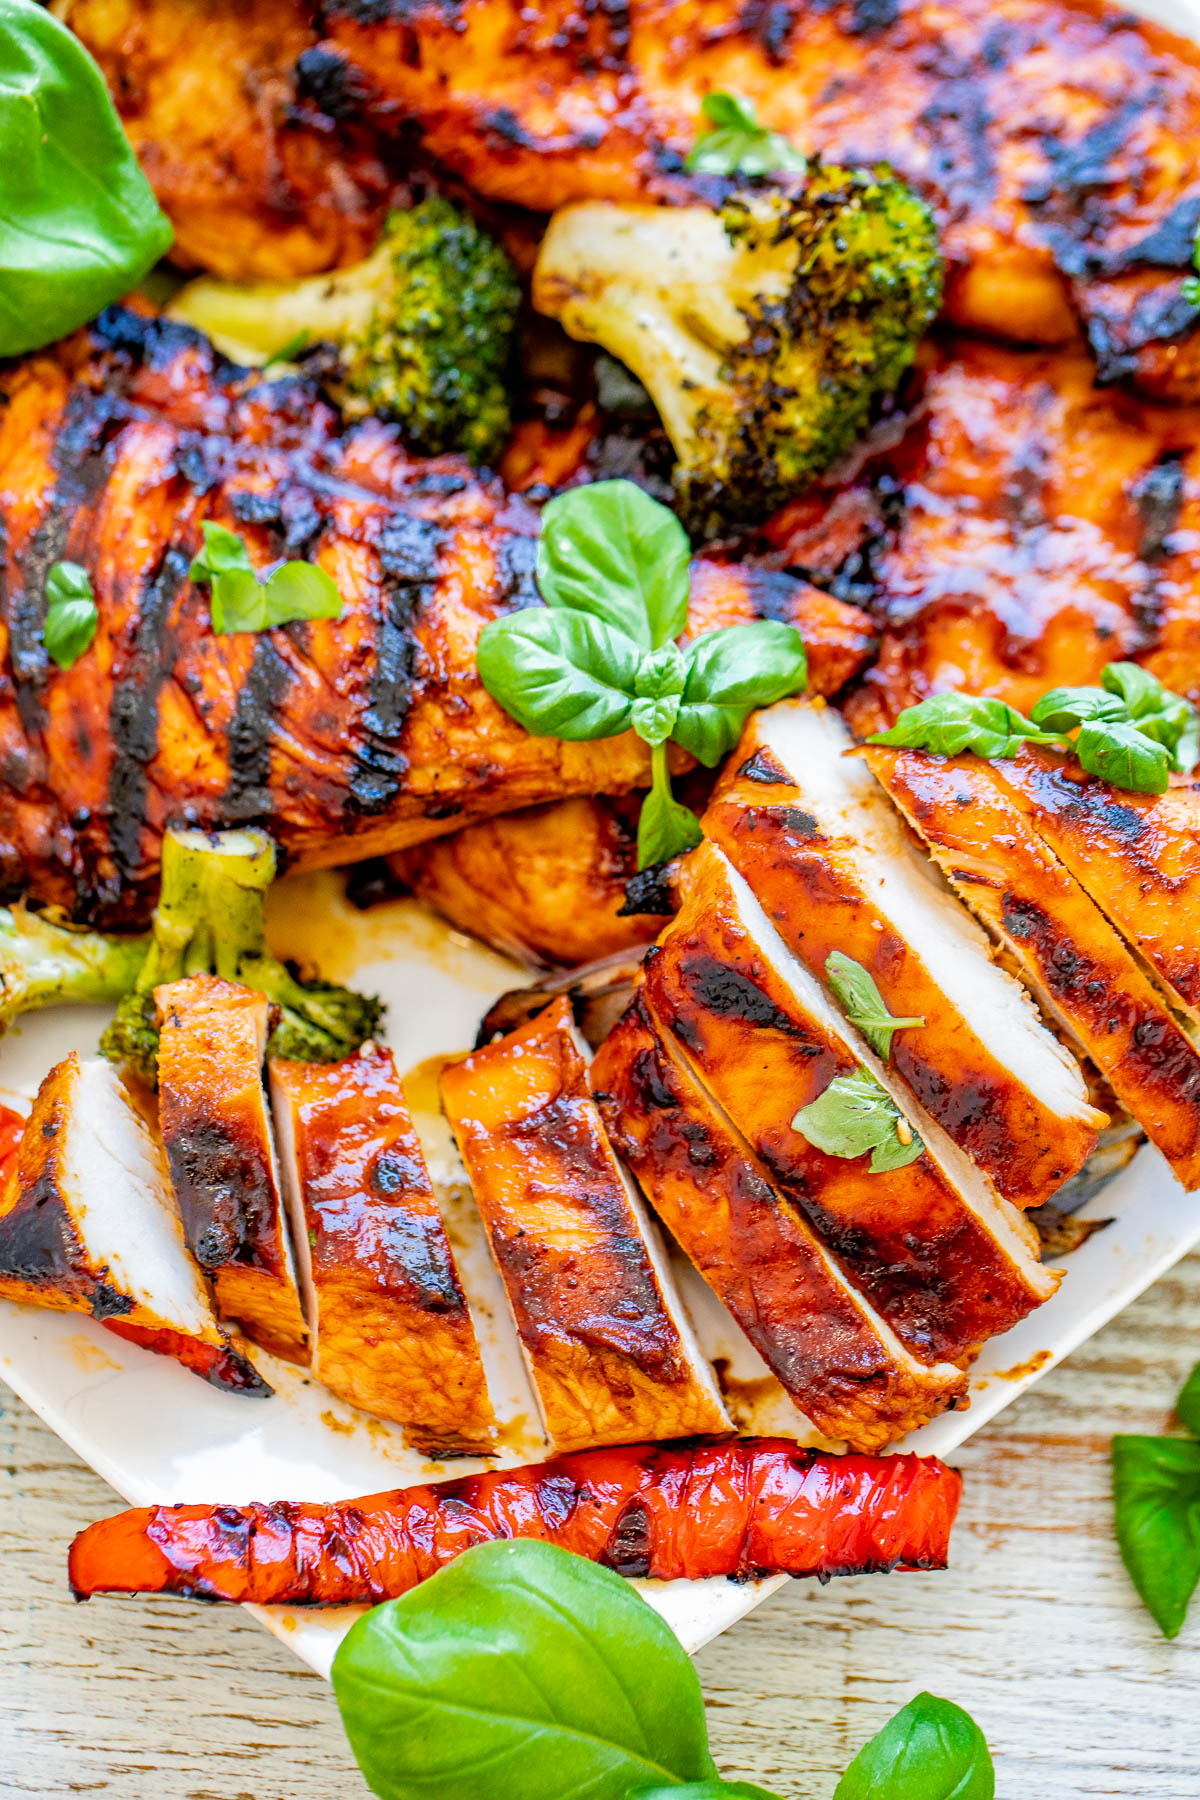 Grilled Sweet and Spicy Basil Chicken - EASY, amazing, PERFECTLY grilled chicken that's sweet-and-spicy with tons of FRESH basil flavor! Learn how to make the BEST grilled chicken and serve it with a side of lightly charred grilled vegetables! Perfect for summer barbecues, picnics, potlucks, and grilling season!